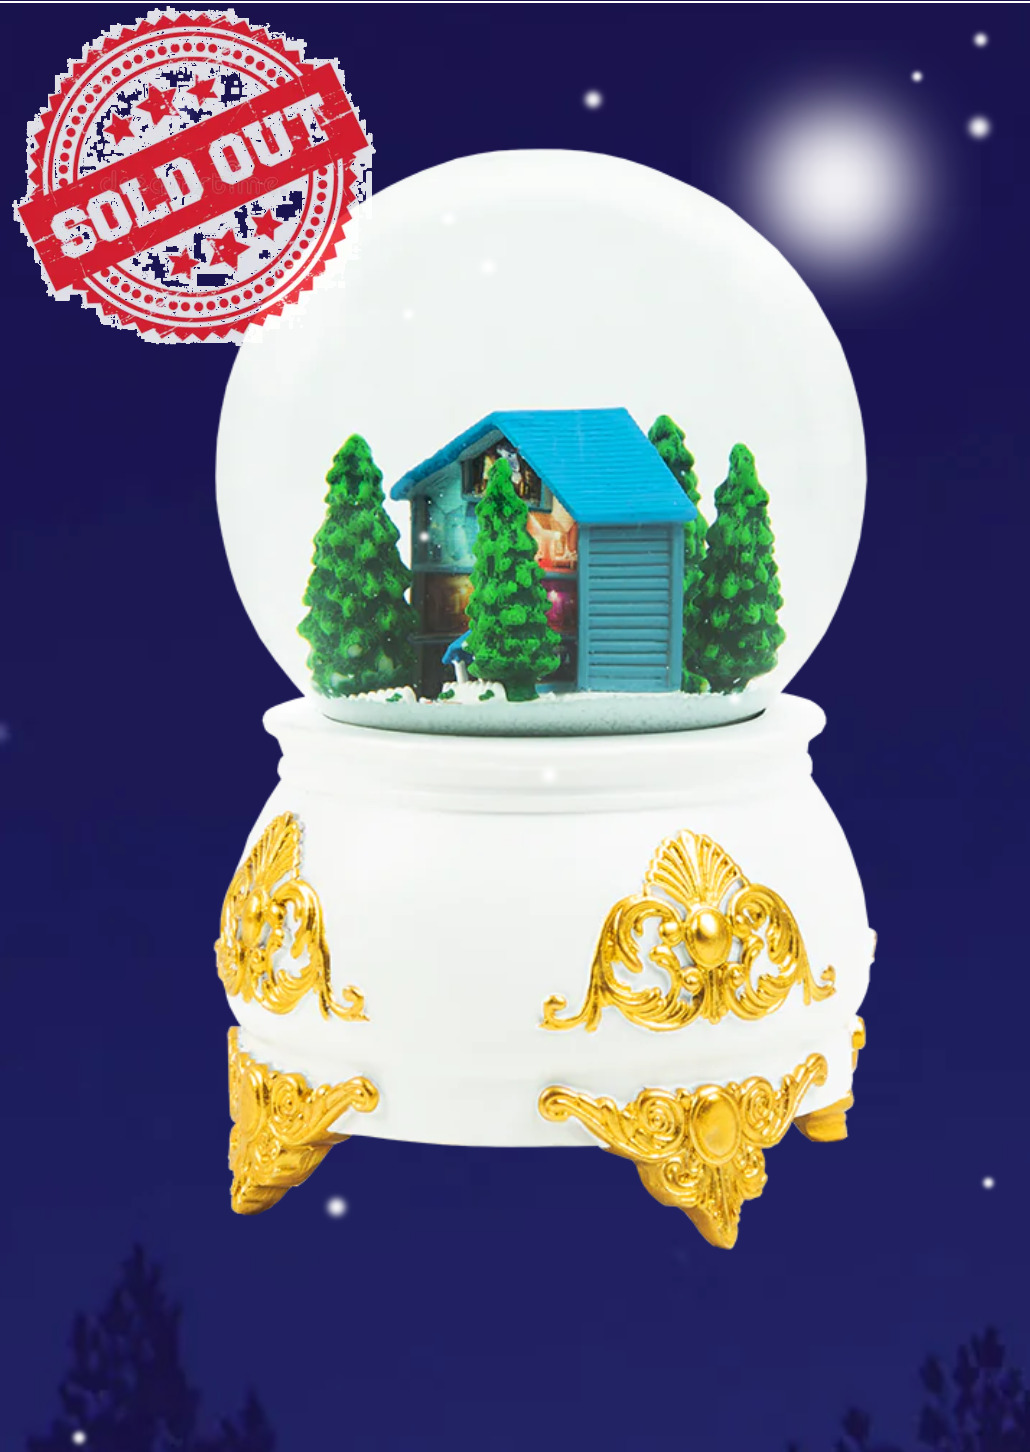 Taylor Swift Lover House Snow Globe ❄️ IN HAND ☃️☃️